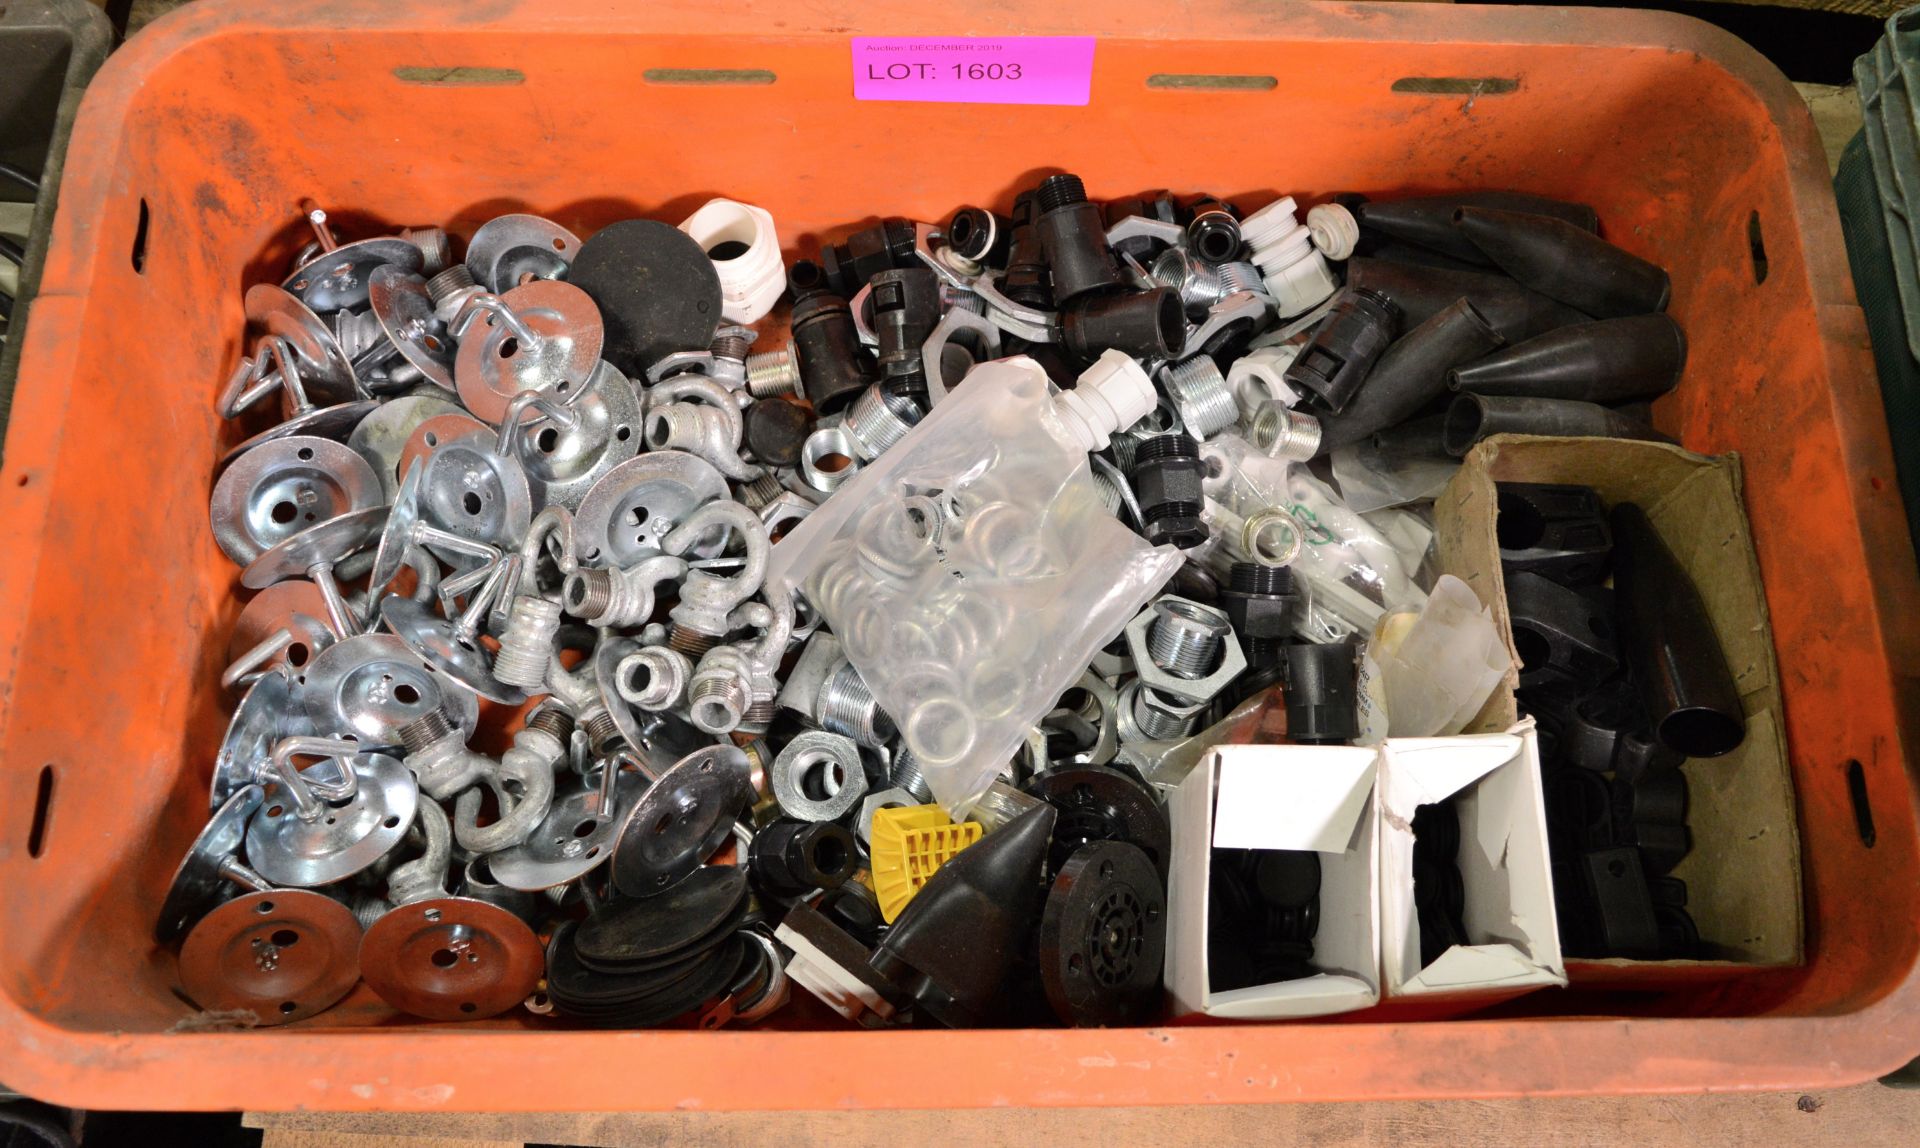 Light Hangers, Gland Nuts, Grommets, Cable Clips.